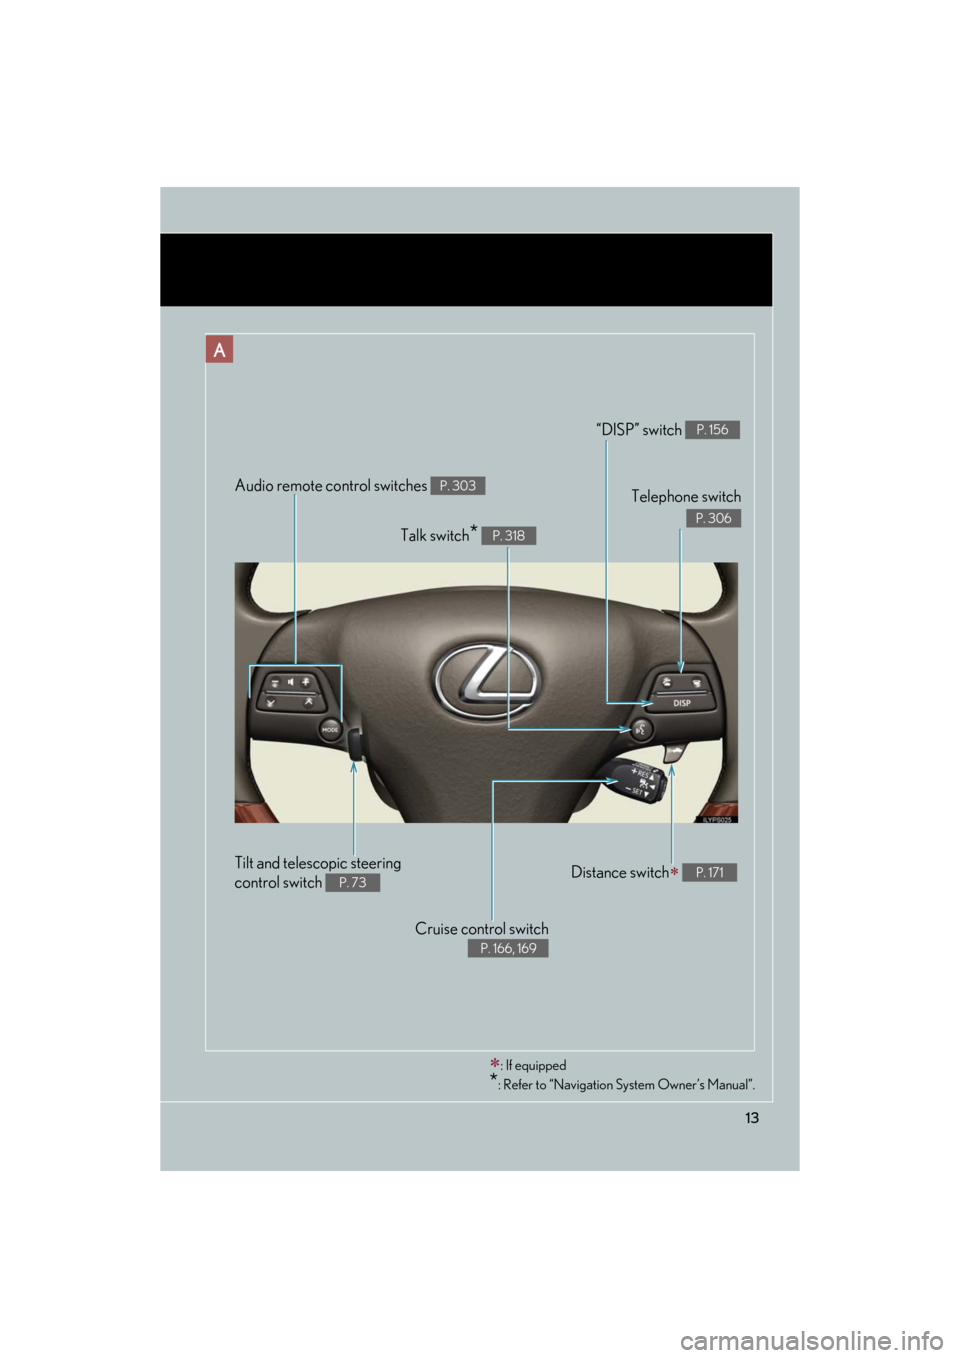 Lexus GS450h 2008  Using the audio system / LEXUS 2008 GS450H OWNERS MANUAL (OM30A96U) 13
GS_HV_U
December 12, 2007 3:50 pm
Audio remote control switches P. 303
Cruise control switch 
 
P. 166, 169
Telephone switch 
P. 306
“DISP” switch P. 156
Distance switch P. 171
Talk switch* 